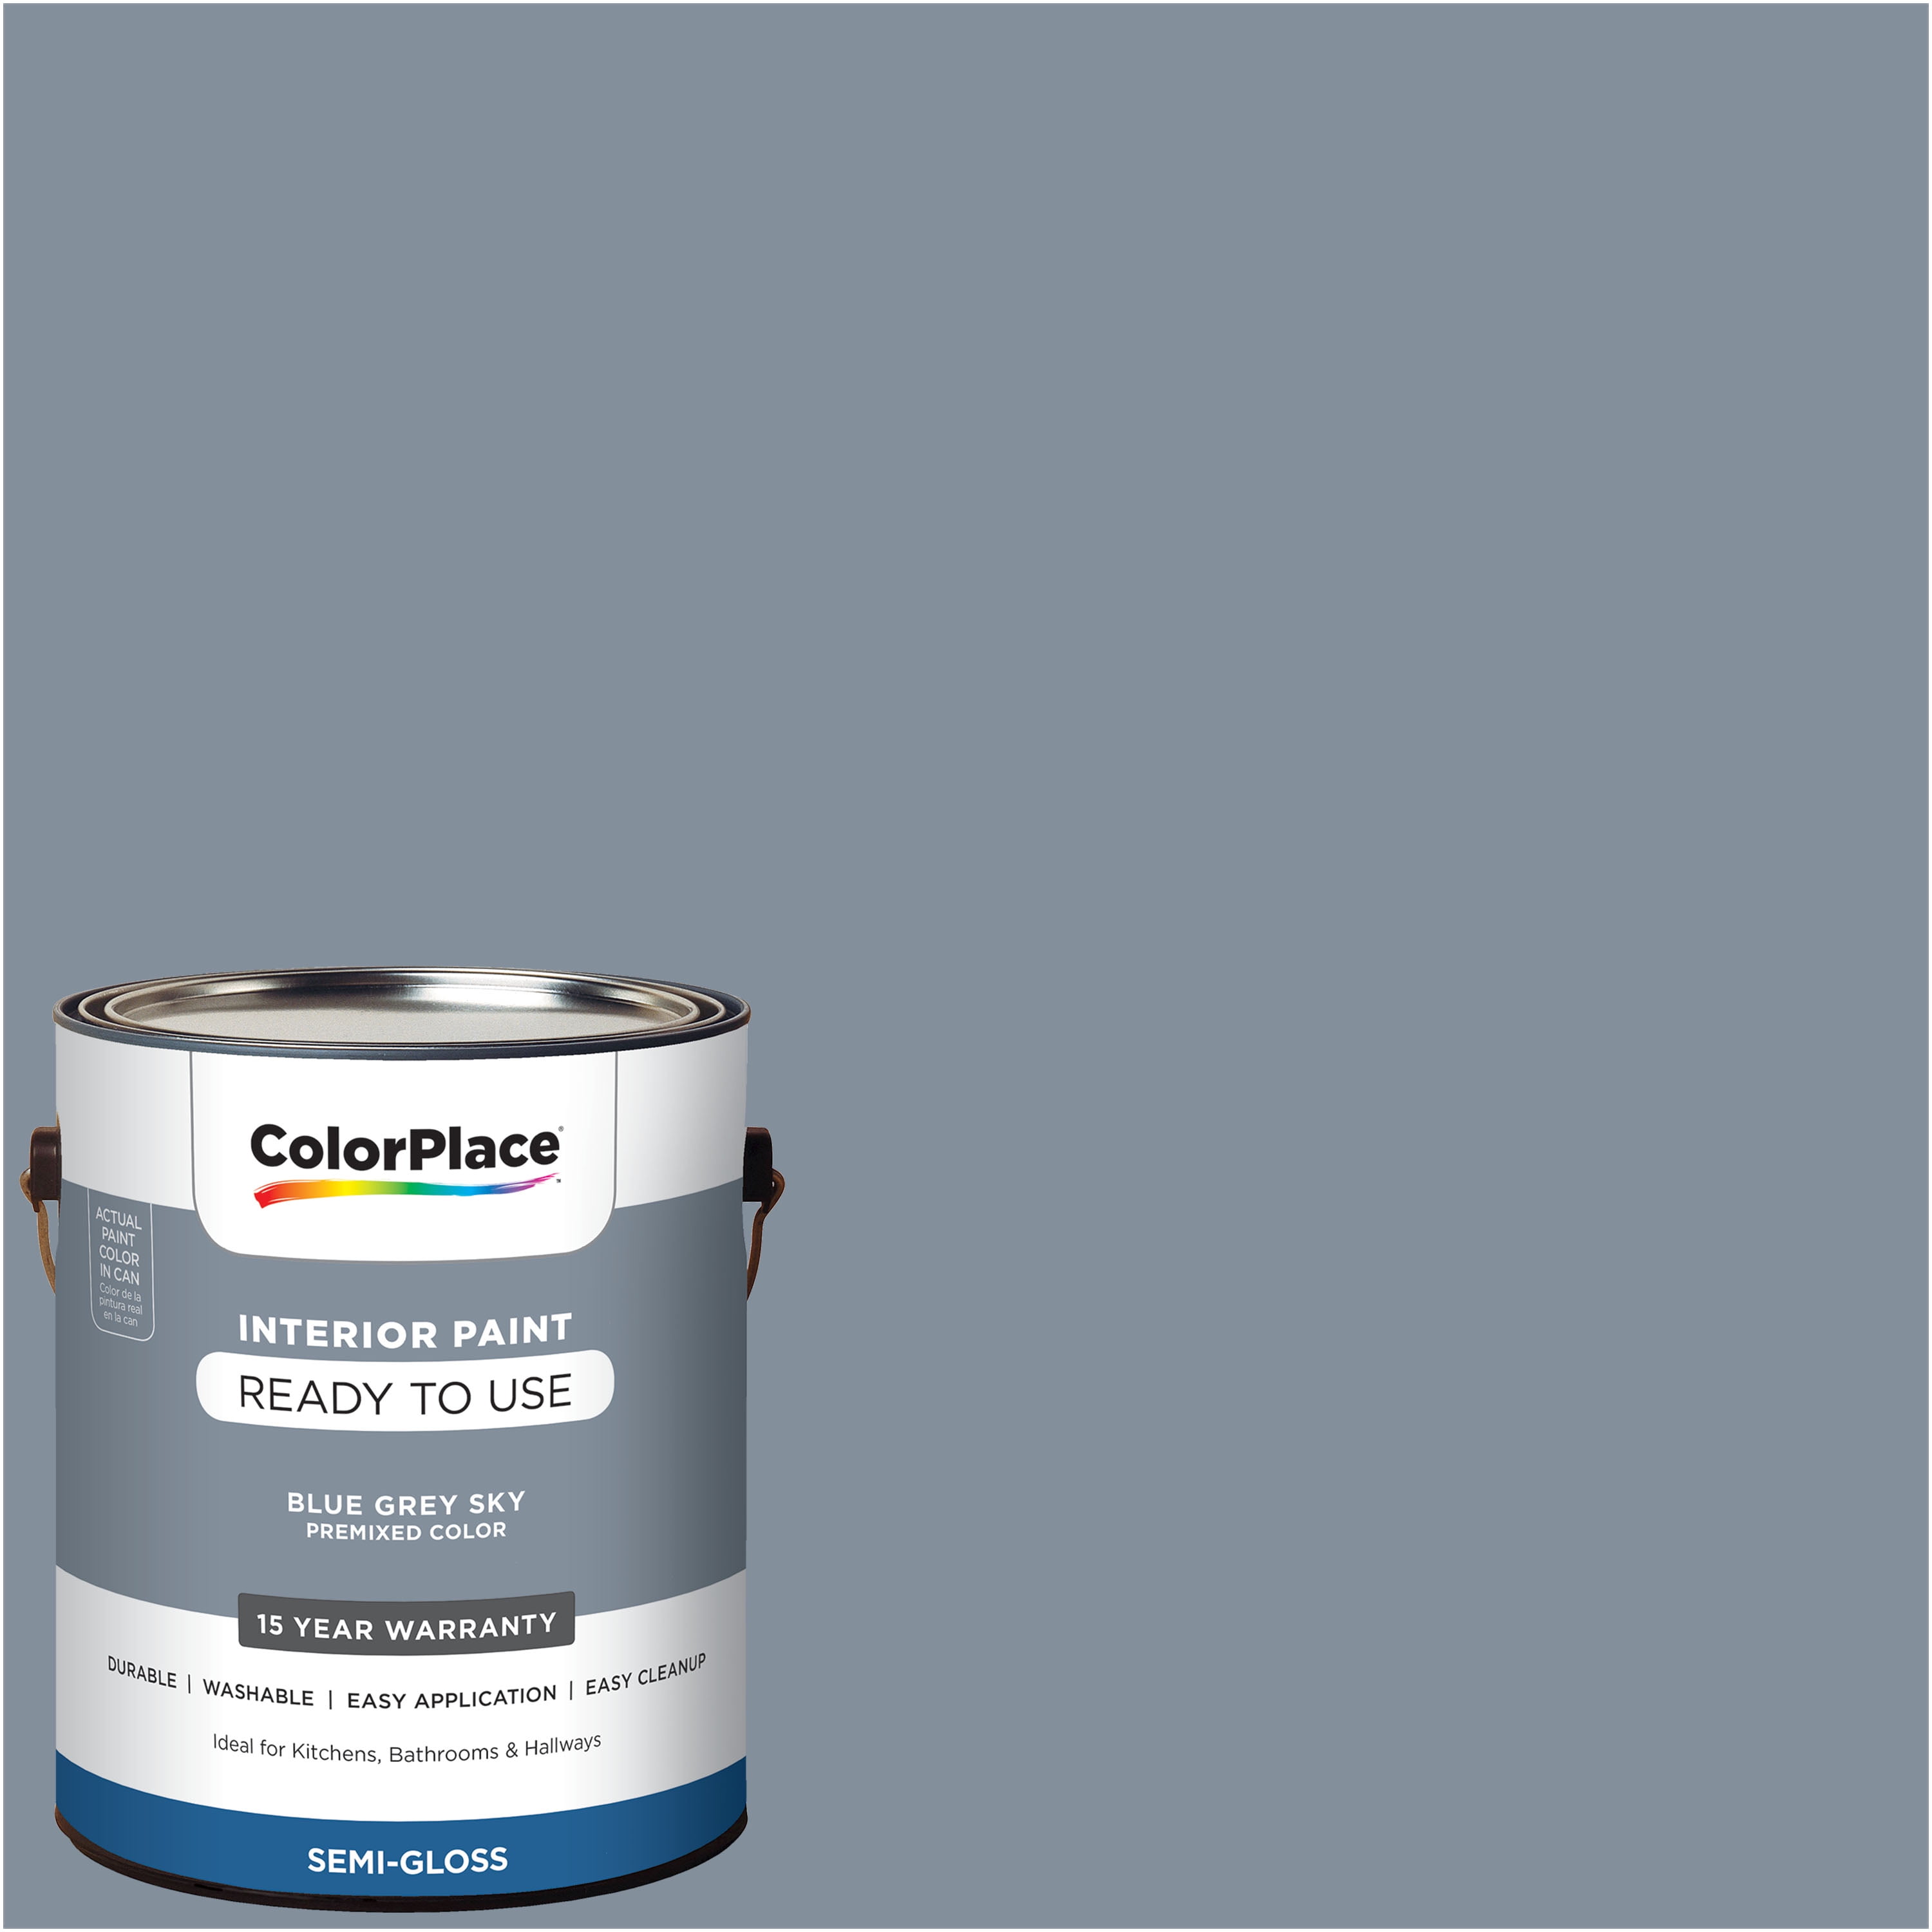 ColorPlace Ready to Use Interior Paint, Blue Grey Sky, 1 Gallon, Semi-Gloss